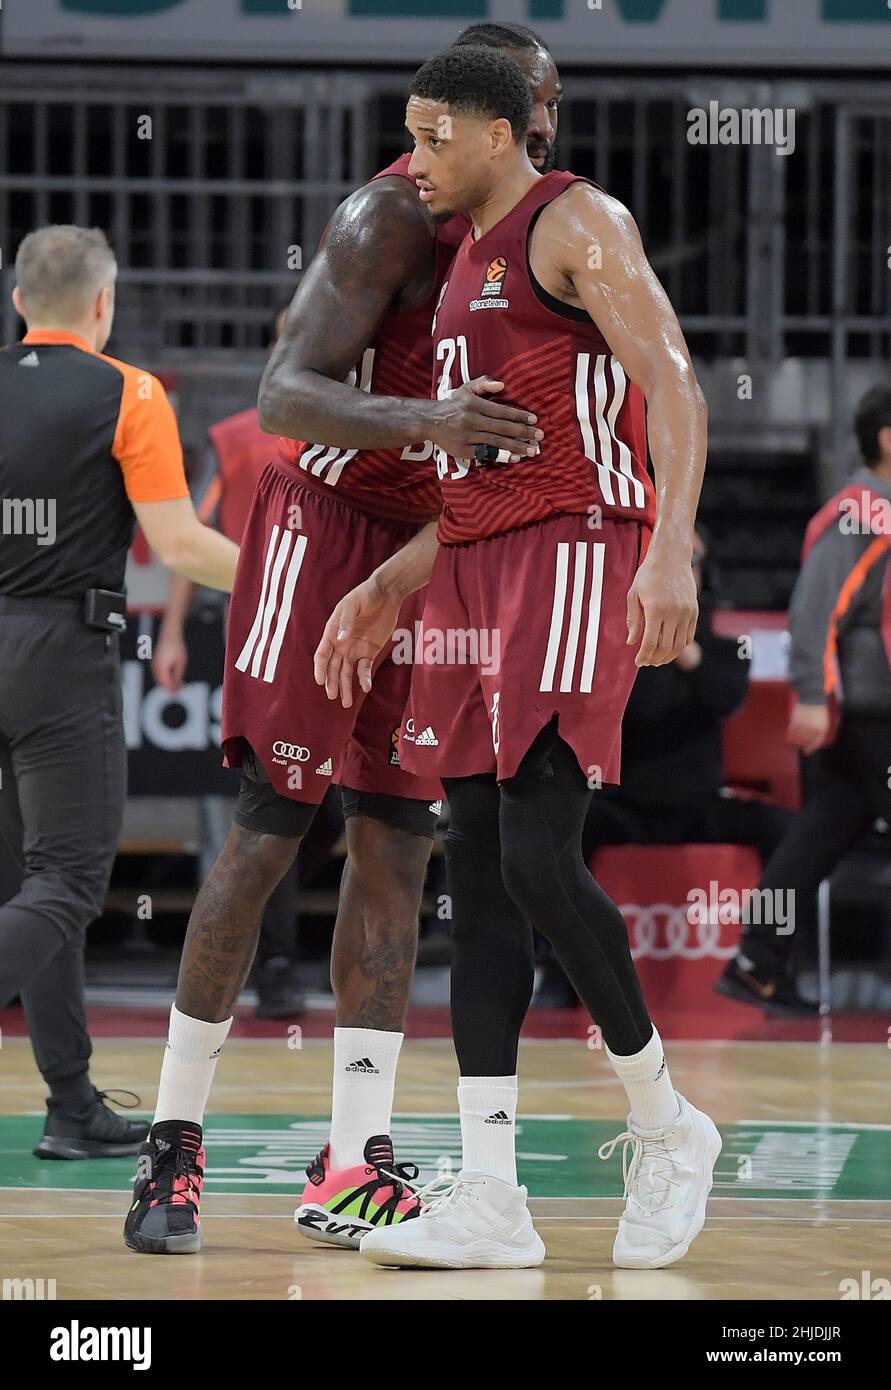 Muenchen, Germany (DE), 28 January, 2022. Pictured left to right, Mannschaft, Spieler, jubeln nach Spielende, celebrate at the end of the match at the Basketball Euroleague, FC Bayern Muenchen - Alba Berlin. Credit: Eduard Martin/Alamy Live News Stock Photo